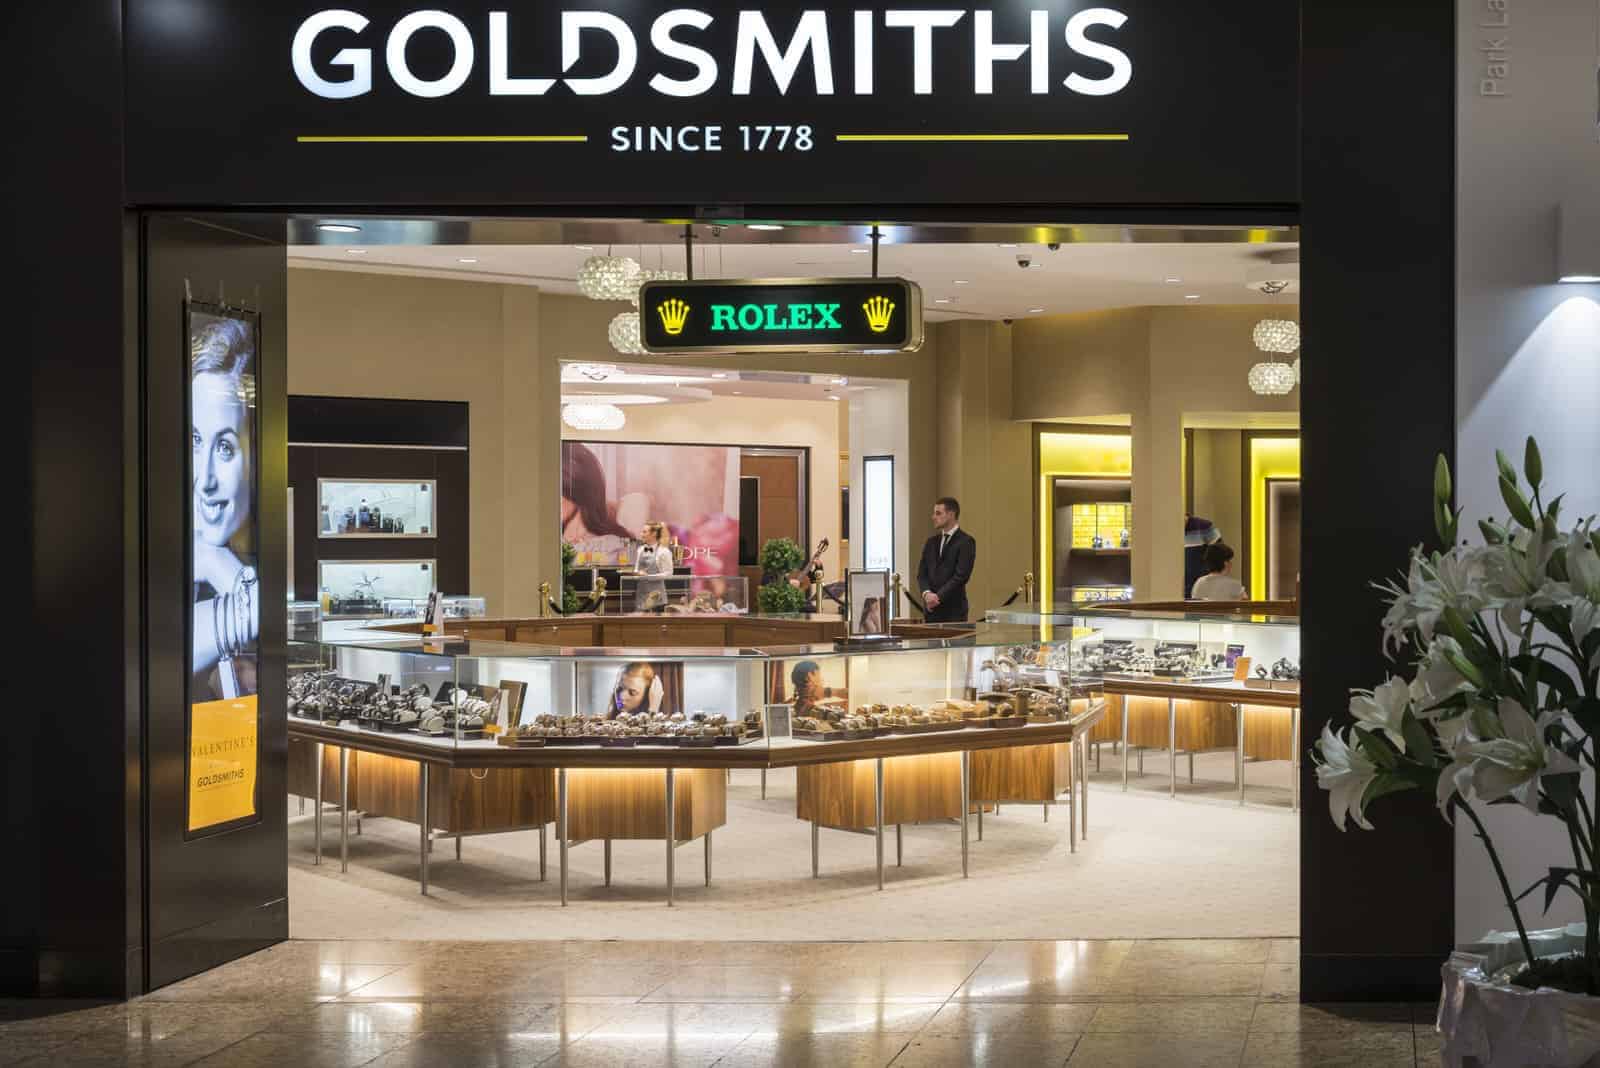 A goldsmiths store in a shopping mall.